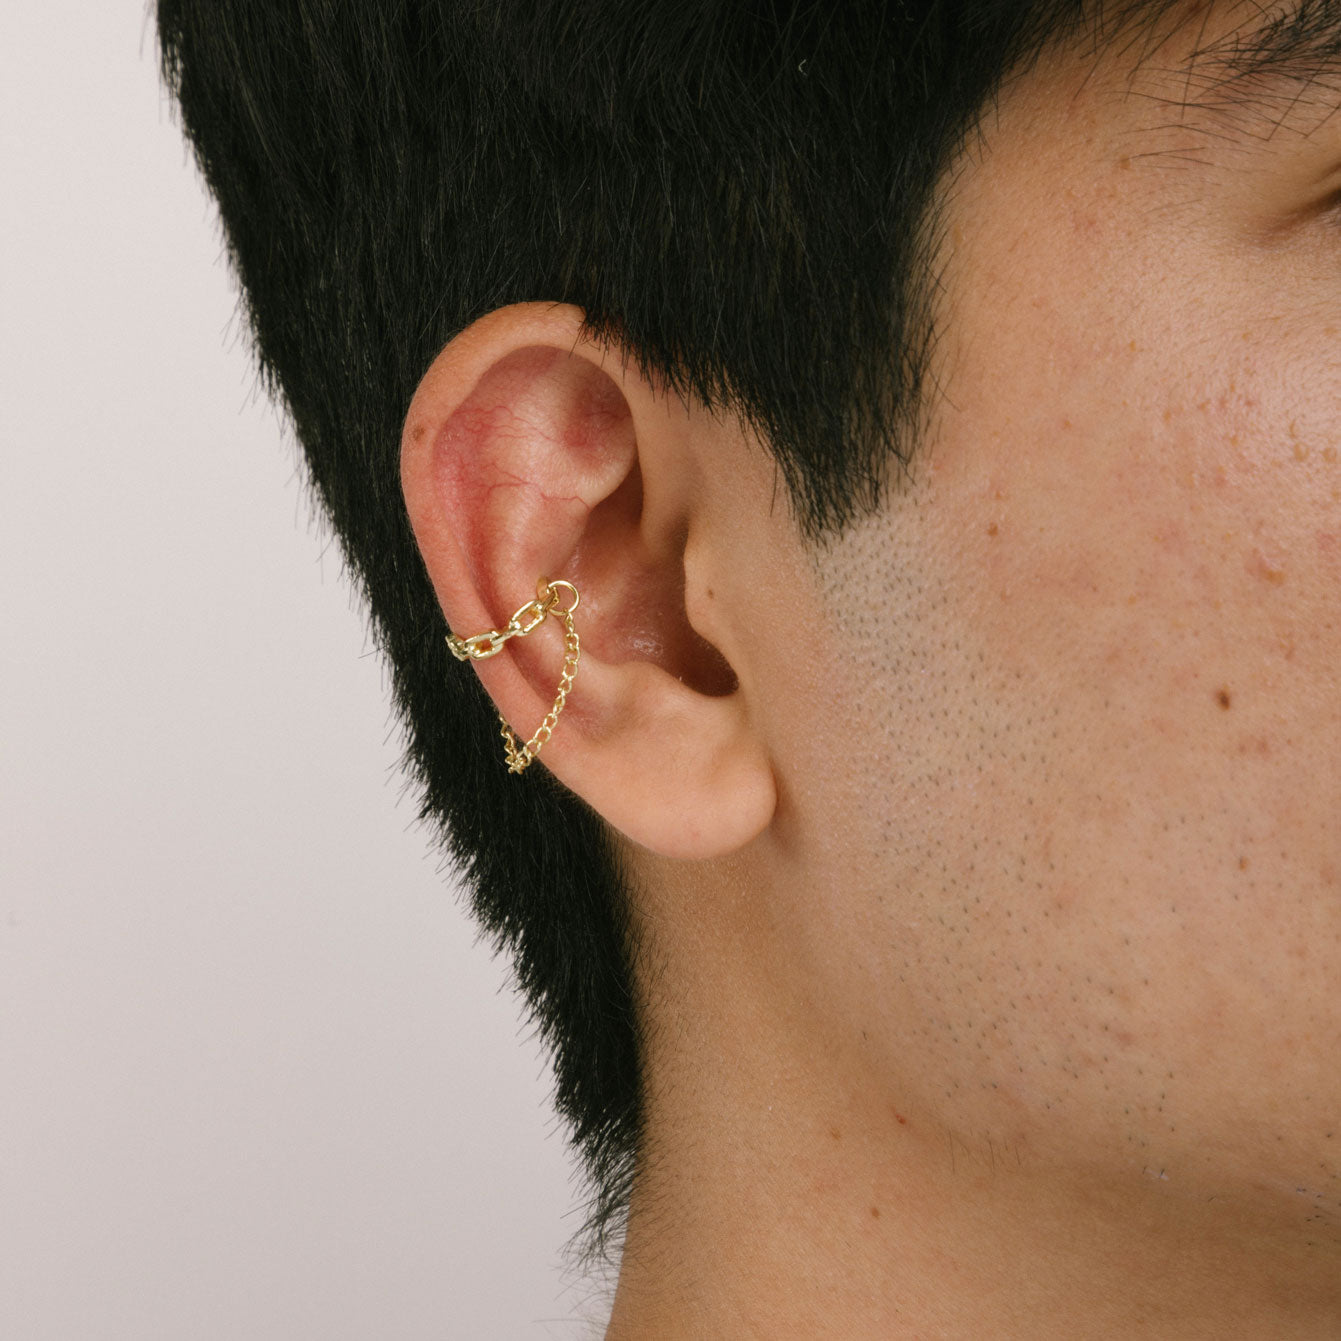 A model wearing the Double Chain Ear Cuff in Gold features a clip-on closure type that is suitable for all ear types, including thick/large ears, sensitive ears, small/thin ears and stretched/healing ears. On average, it allows for comfortable wear duration of up to 24 hours, providing a medium secure hold that can be adjusted if gently squeezed. Made of goldtone plated zinc alloy, the item is sold as one piece.